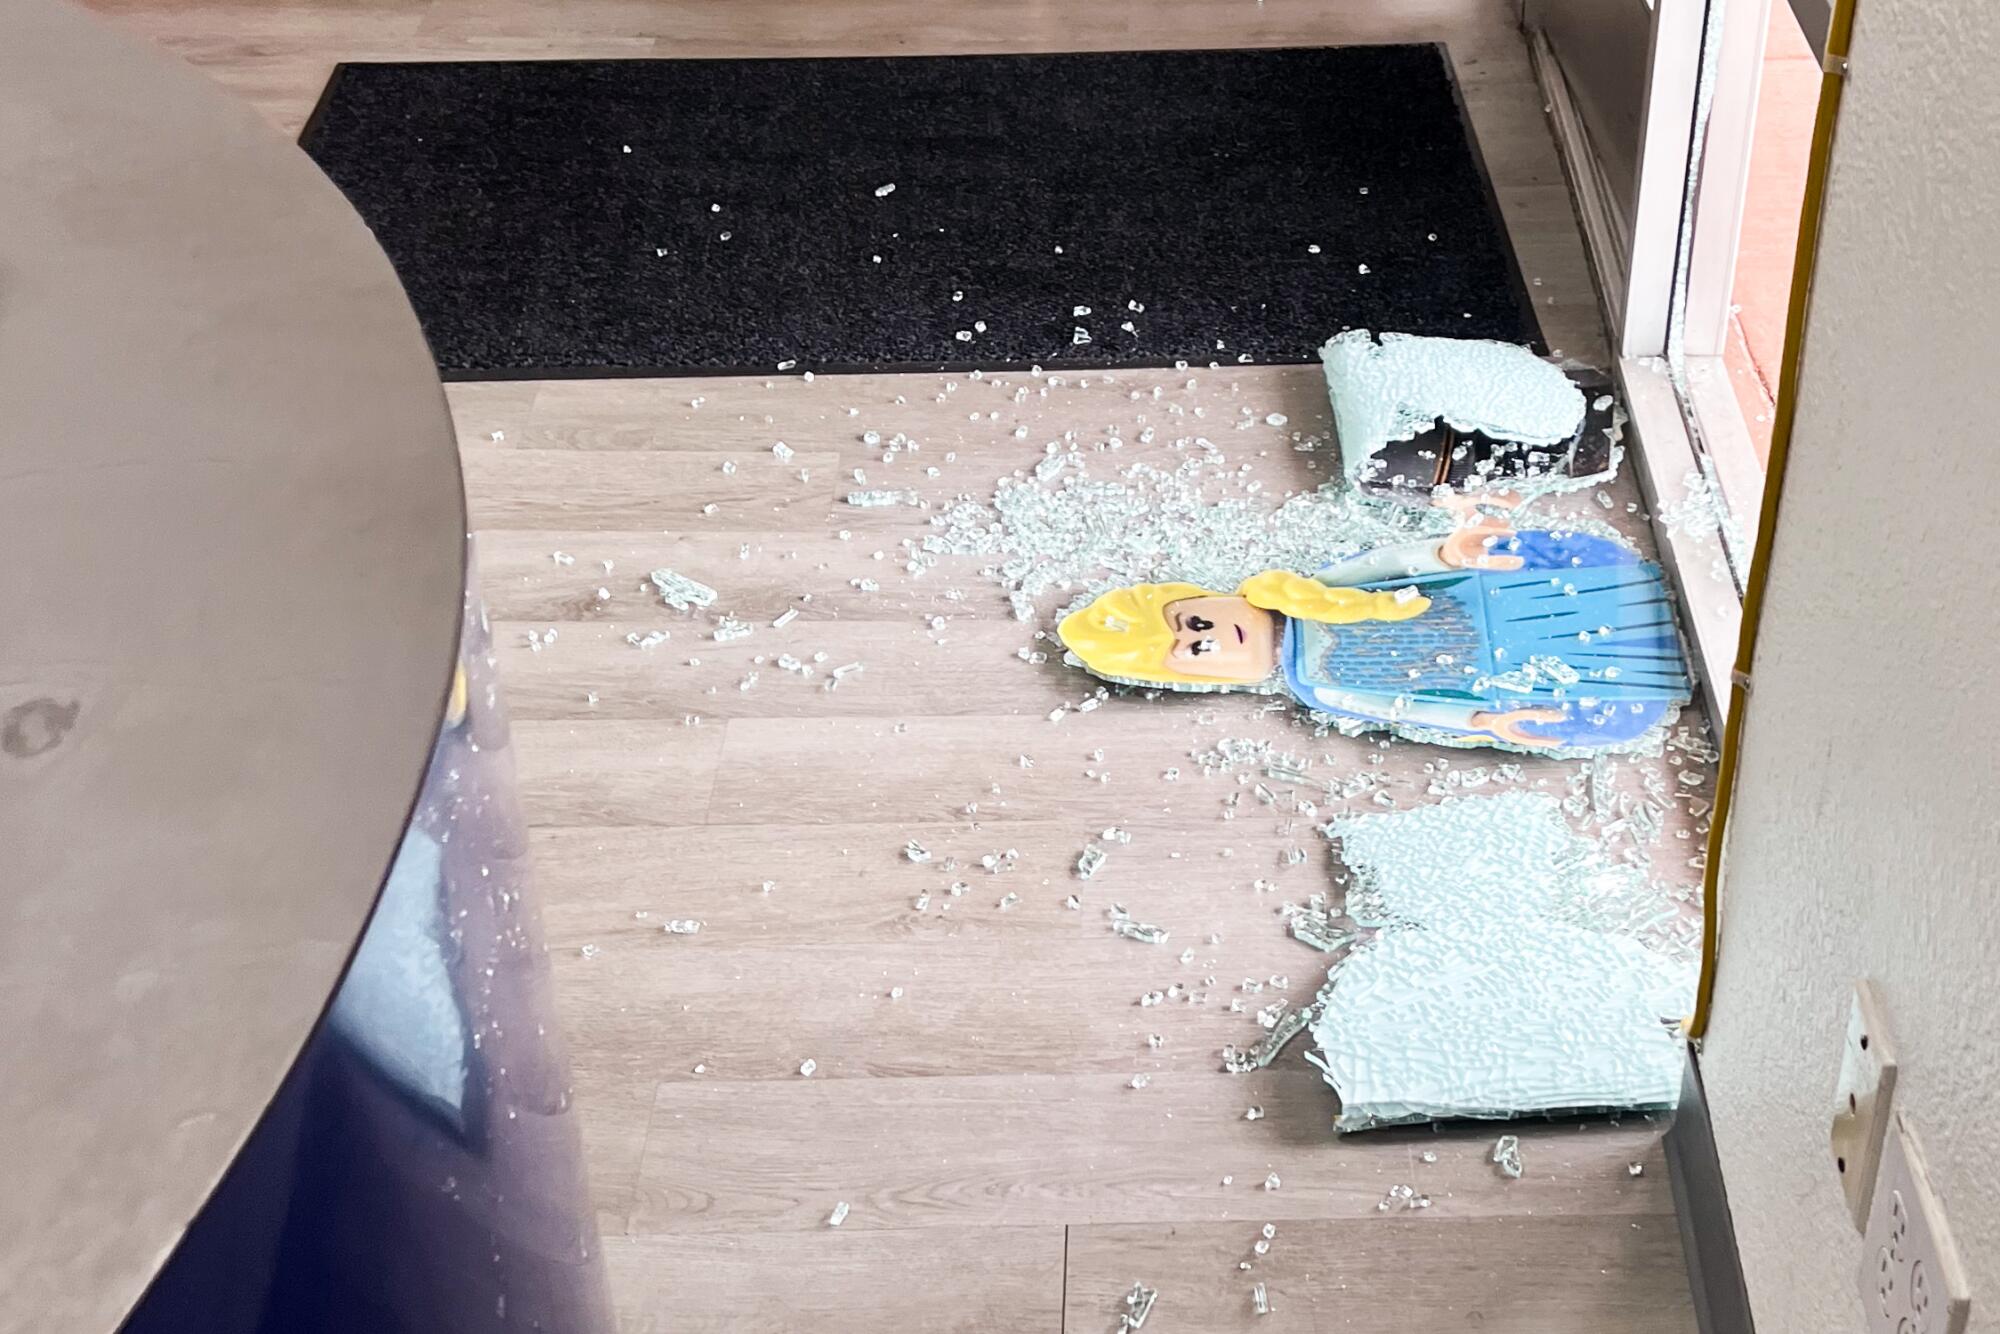 A cutout of a Lego figurine is surrounded by broken glass on the floor of Bricks & Minifigs in Whittier